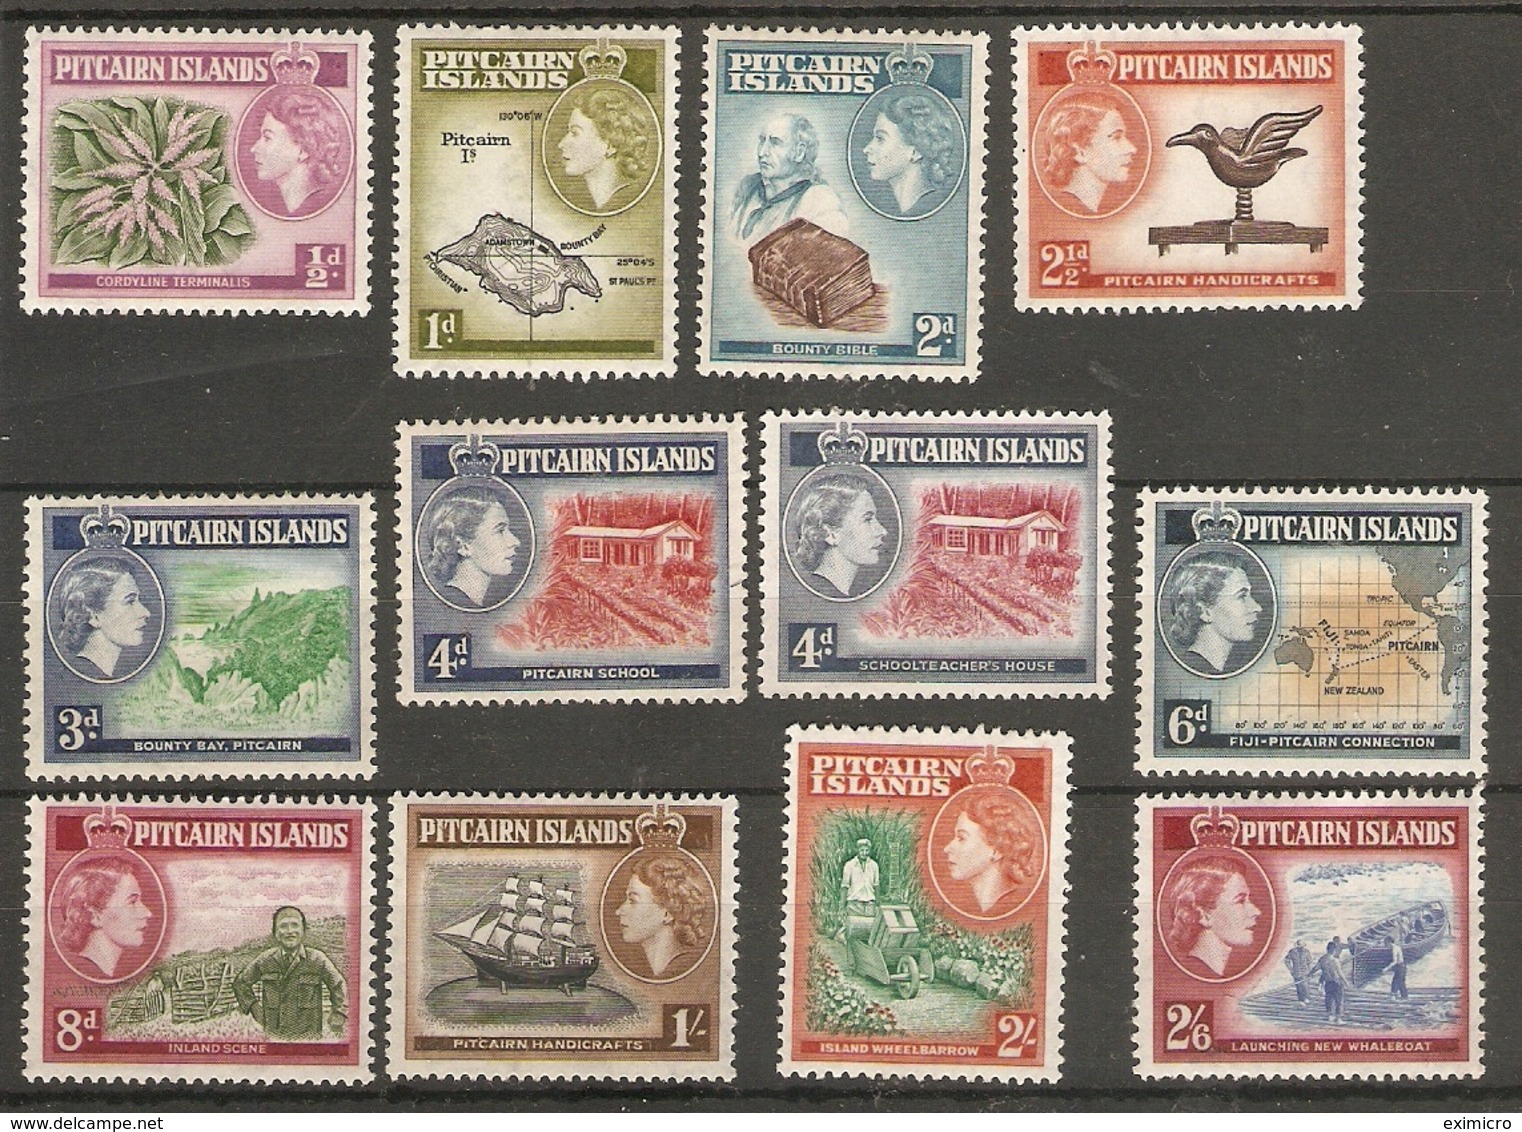 PITCAIRN ISLANDS 1957 - 1963 SET OF 12 STAMPS  SG 18/28 (LIGHTLY) MOUNTED MINT Cat £50 - Pitcairn Islands